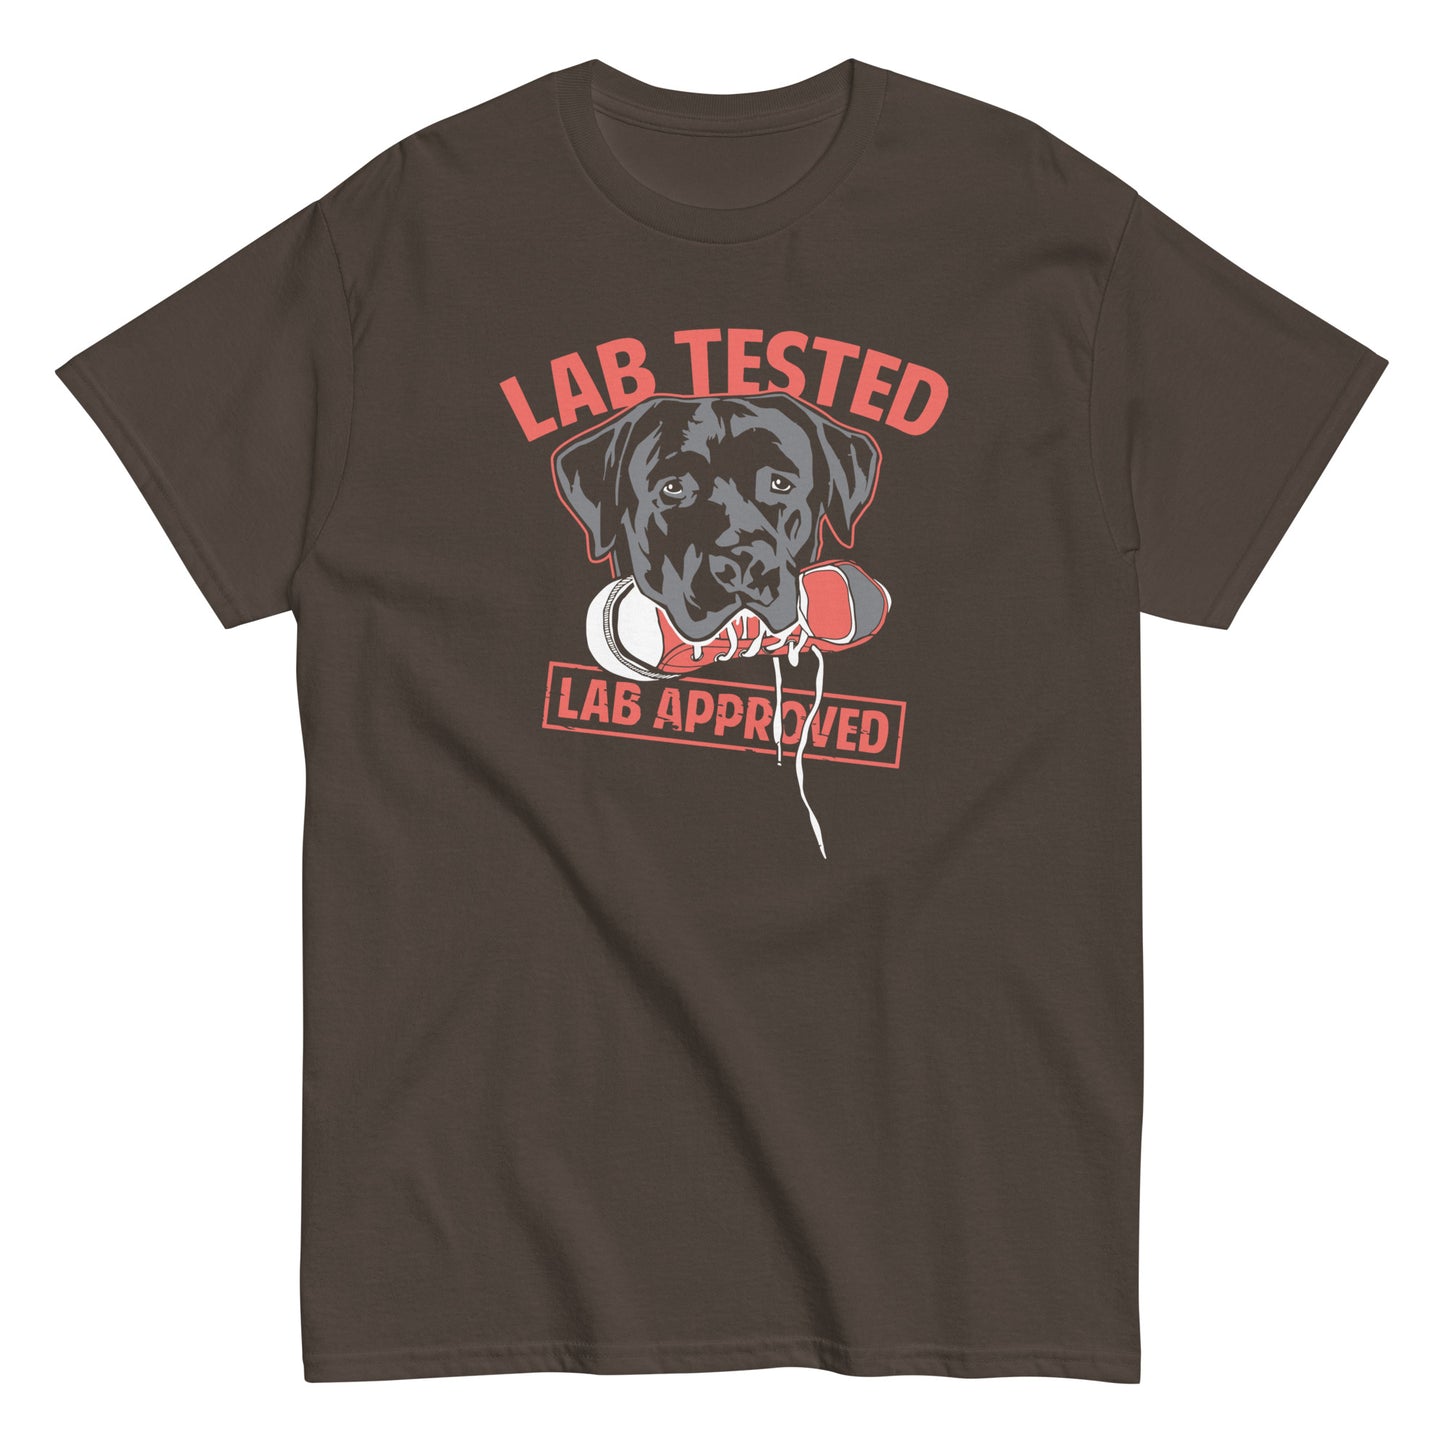 Lab Tested, Lab Approved Men's Classic Tee